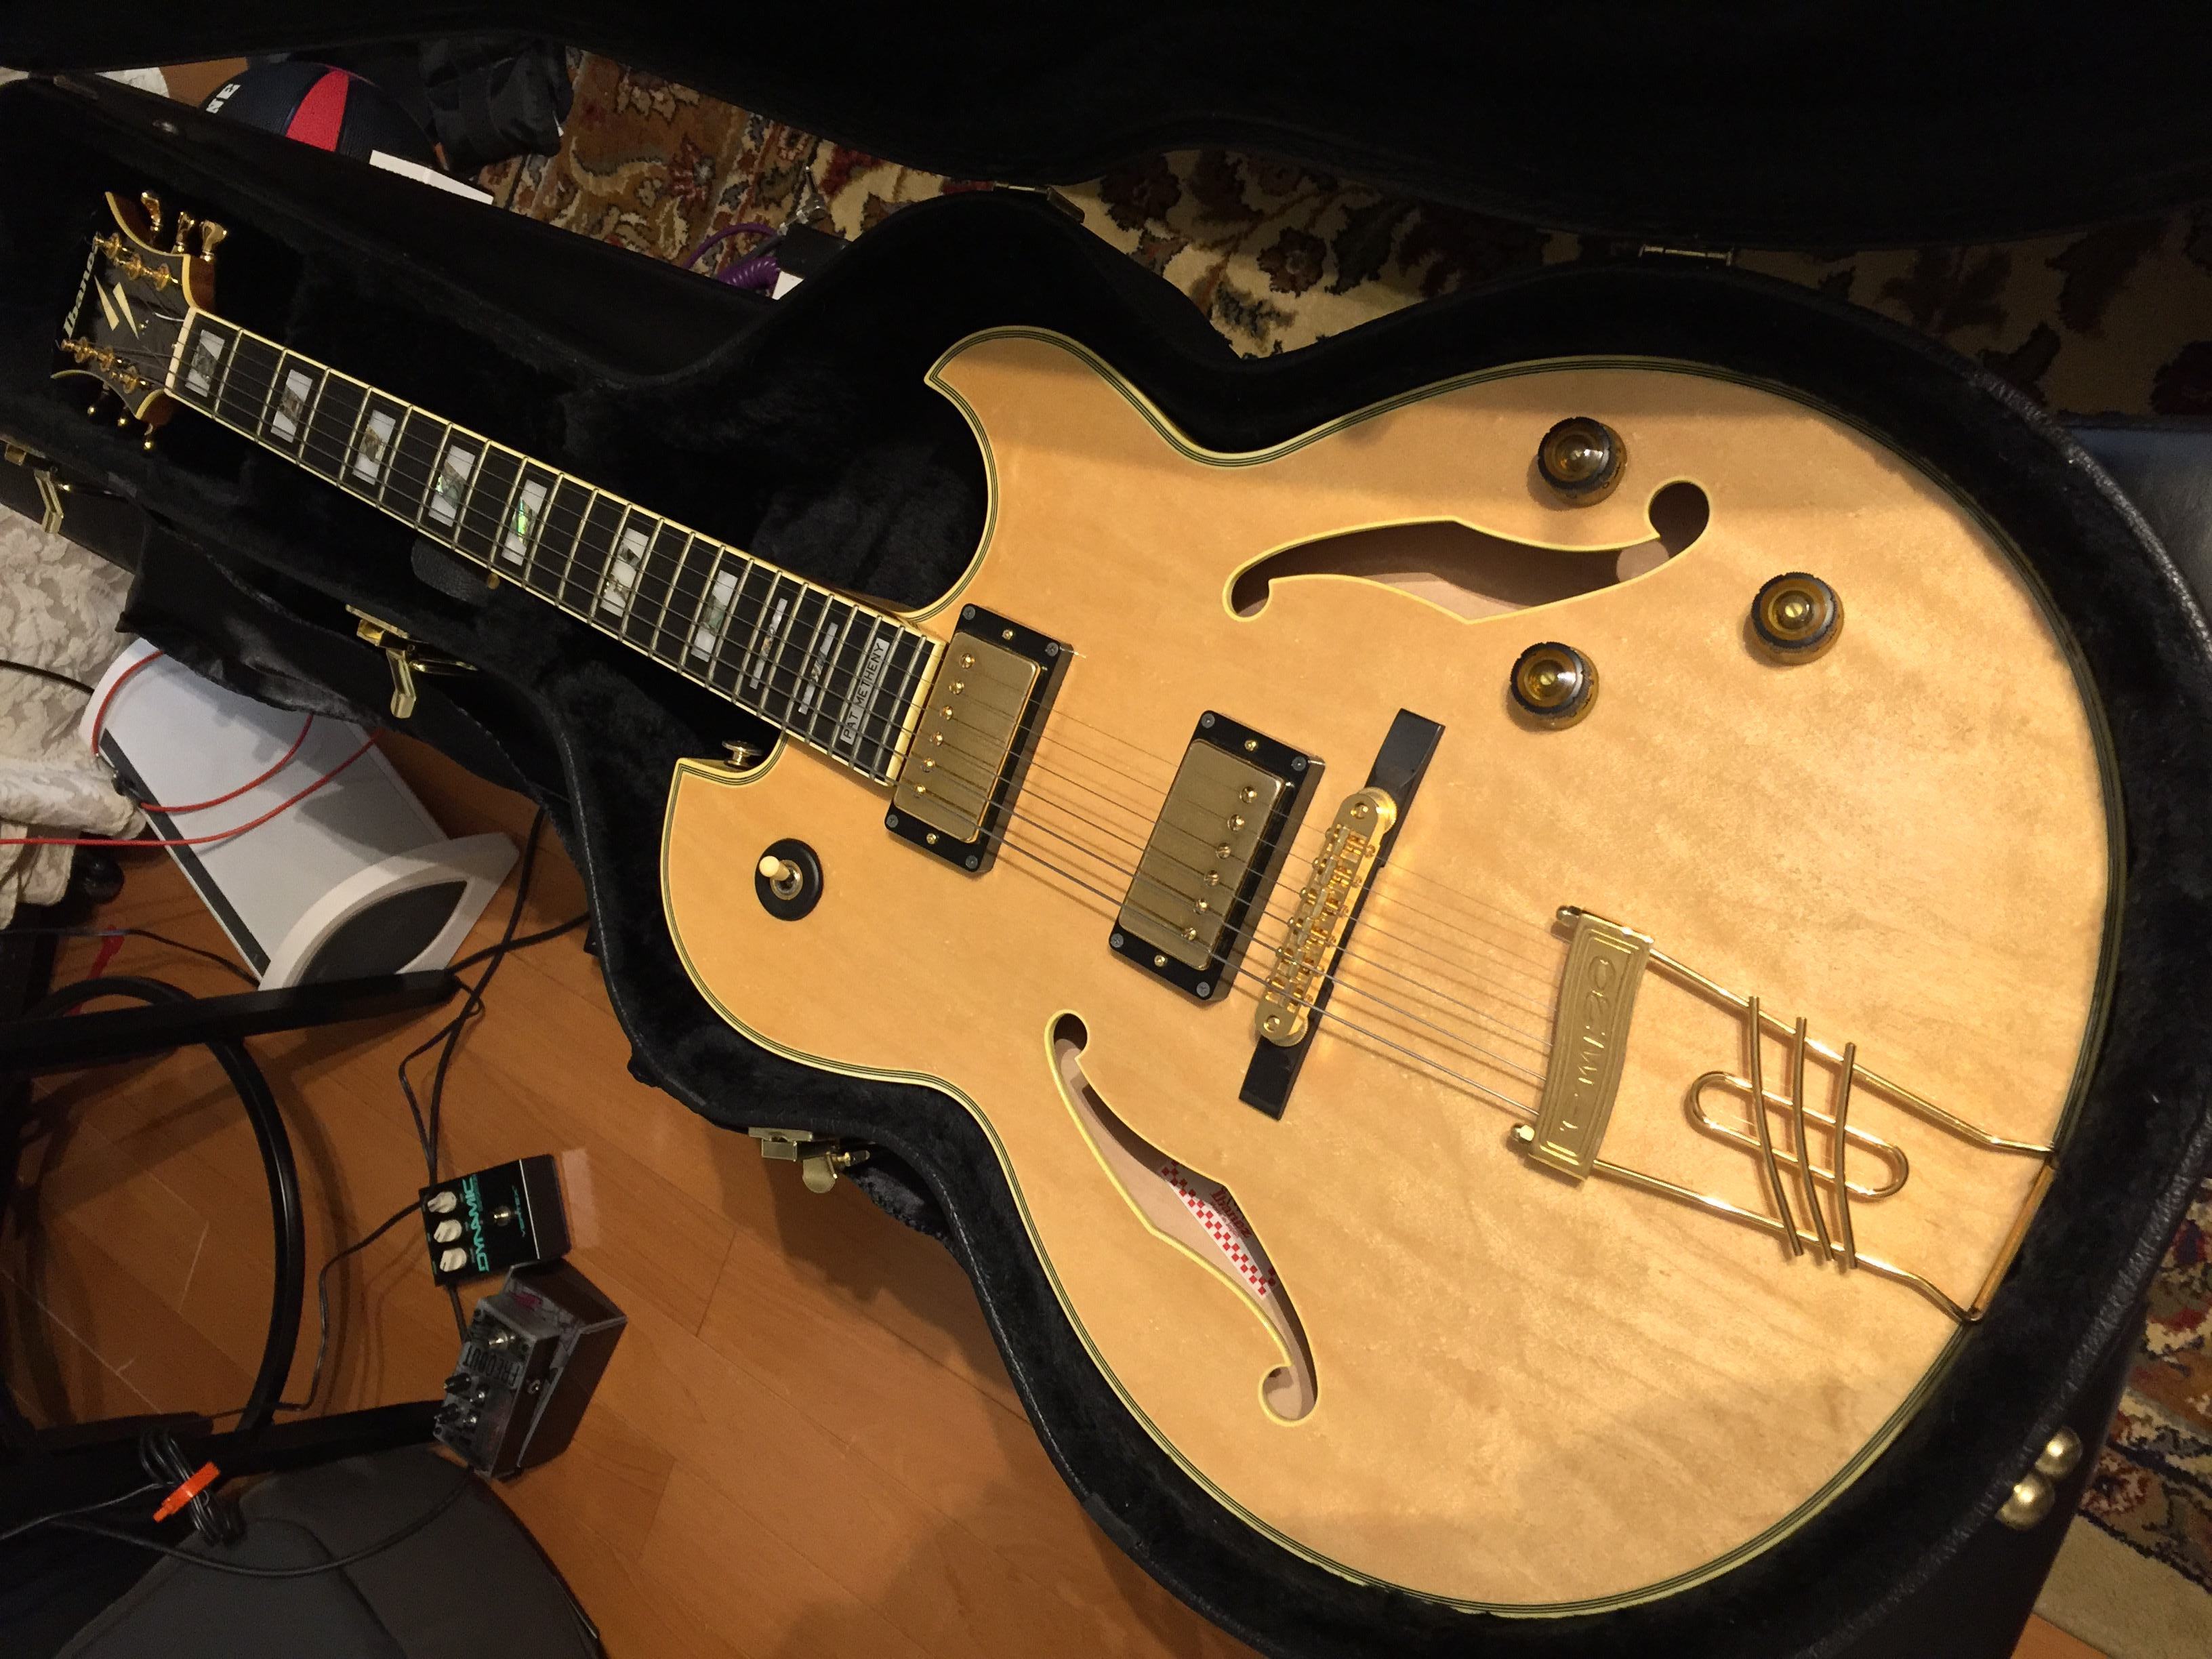 Sold - Ibanez Metheny PM-120 $1200 PP + shipped US48 | The Gear Page